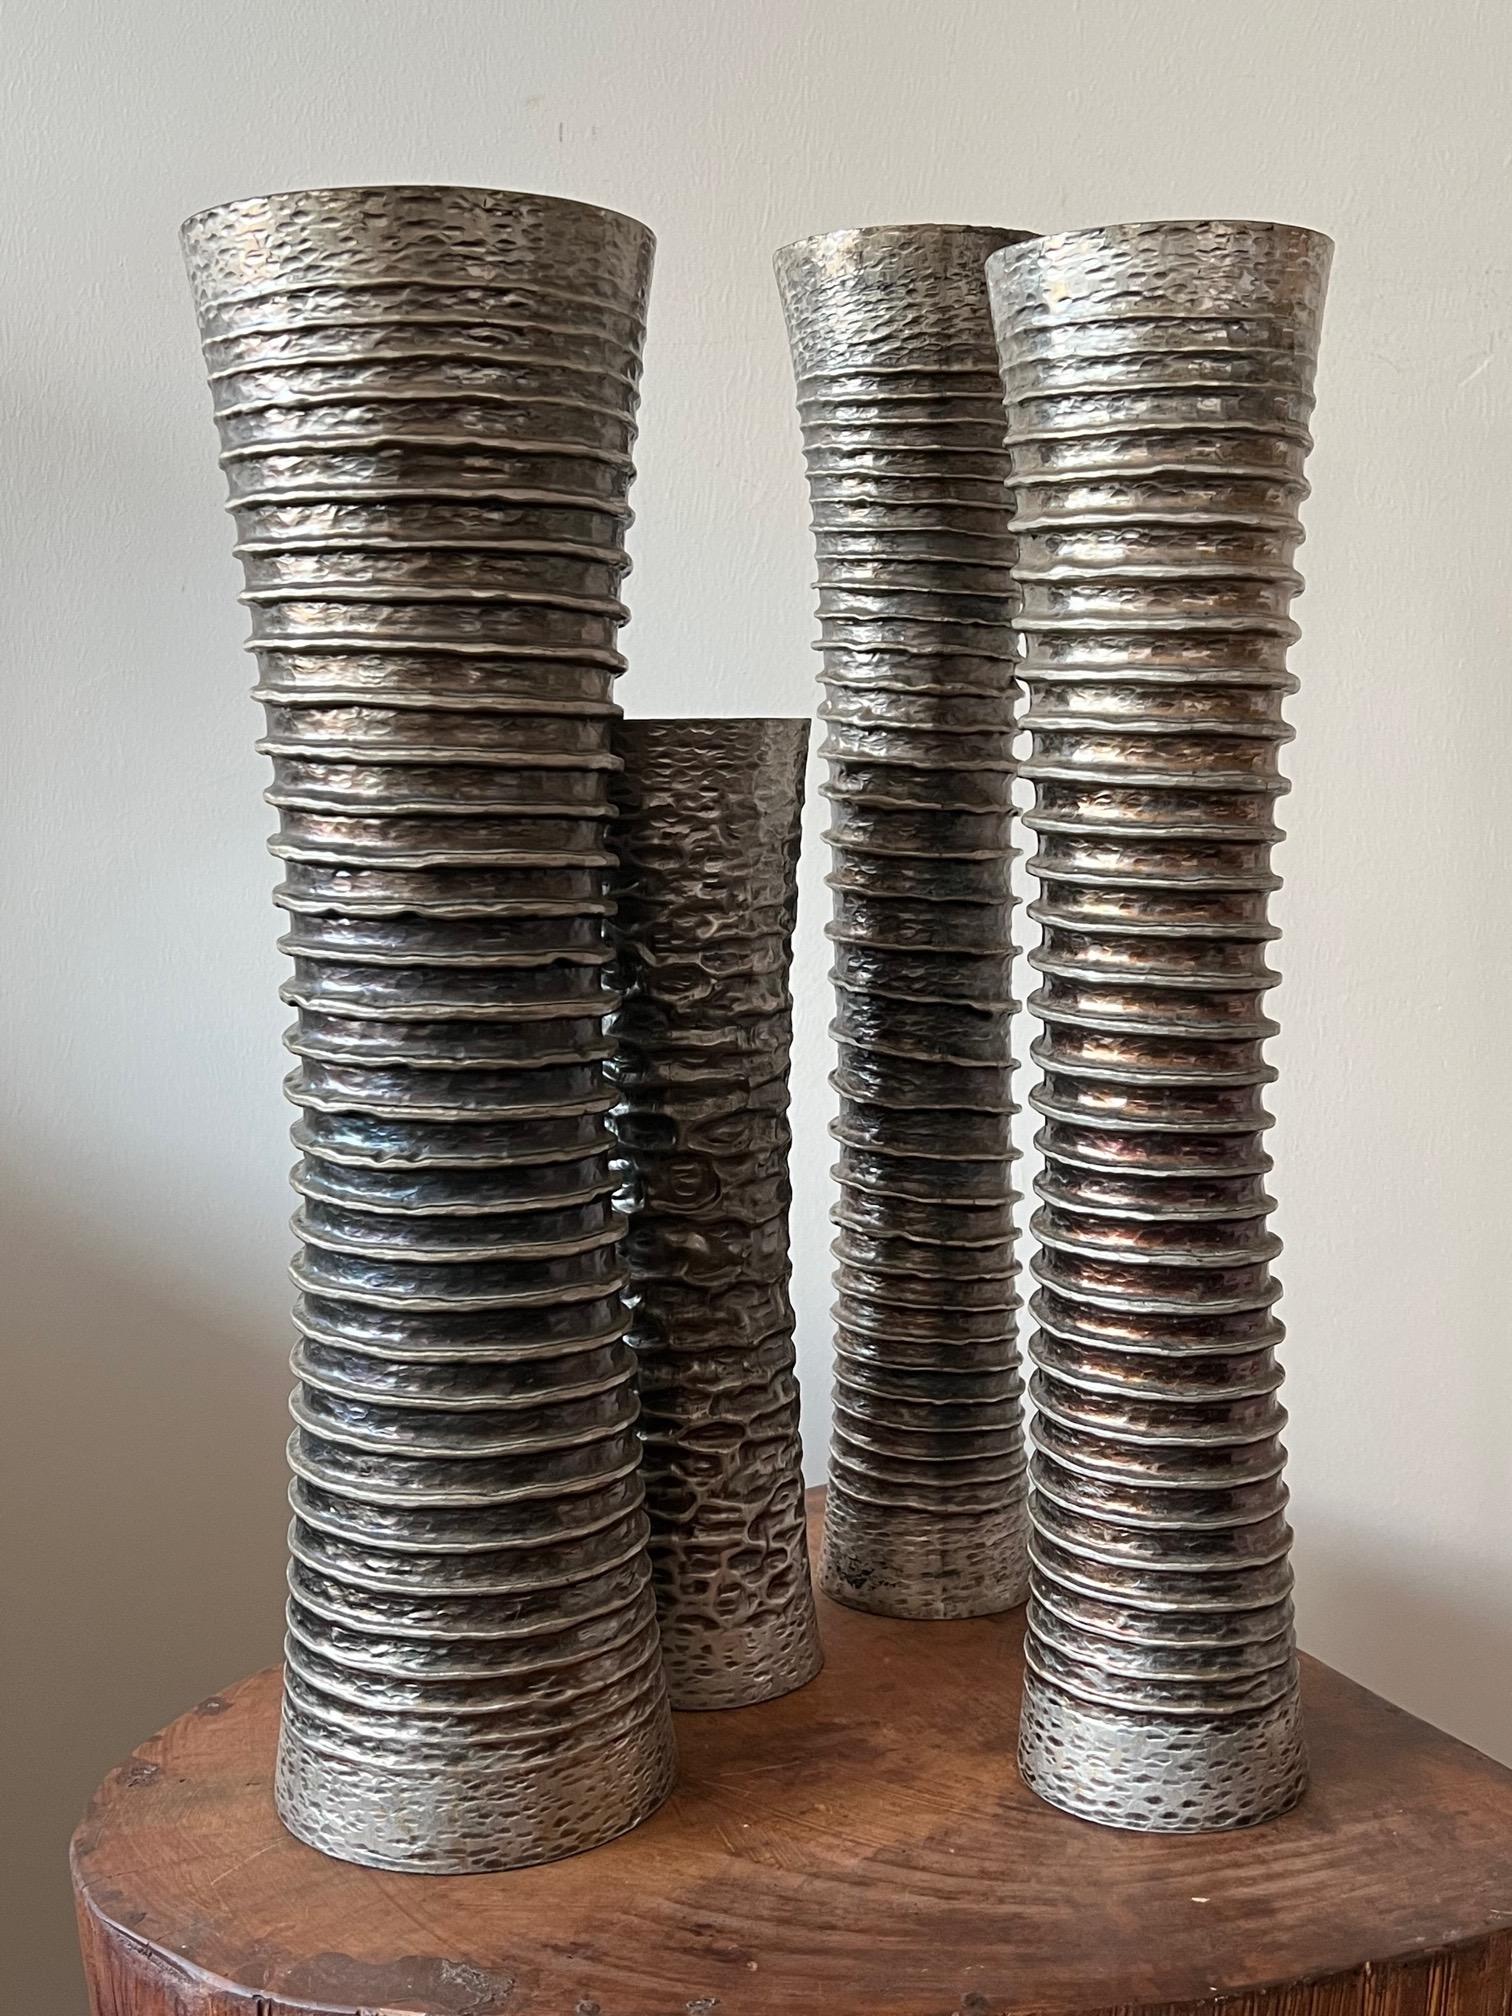 Silvered Group of Vases by Atelier des Orfevres